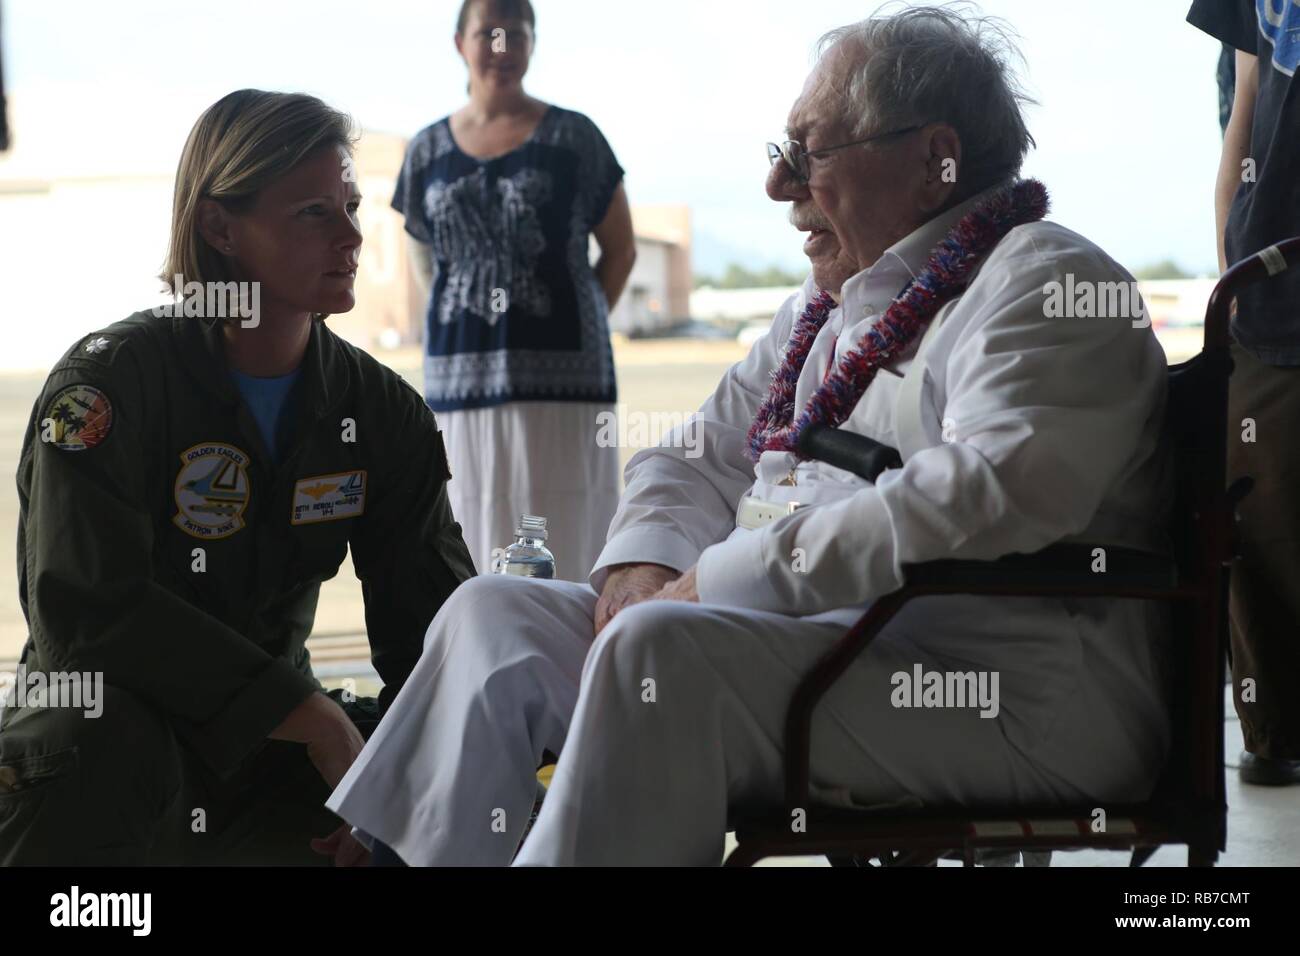 Melvin Heckman, a Pearl Harbor survivor, speaks with Cmdr. Beth Regoli, the commanding officer of Patrol Squadron 9, about his experiences during the attack on Pearl Harbor at Hangar 104 aboard Marine Corps Base Hawaii, December 2, 2016. Heckman is known for rescuing sailors from the USS Arizona during the attack on Pearl Harbor after the ship was attacked by Japanese Zeros. 'I reached out to grab a man's hand to help him up and take him to the island,' said Heckman, a Sheridan, Wyoming, native. 'I got him out of the water and saw that everything below his belly button was missing; he died in  Stock Photo